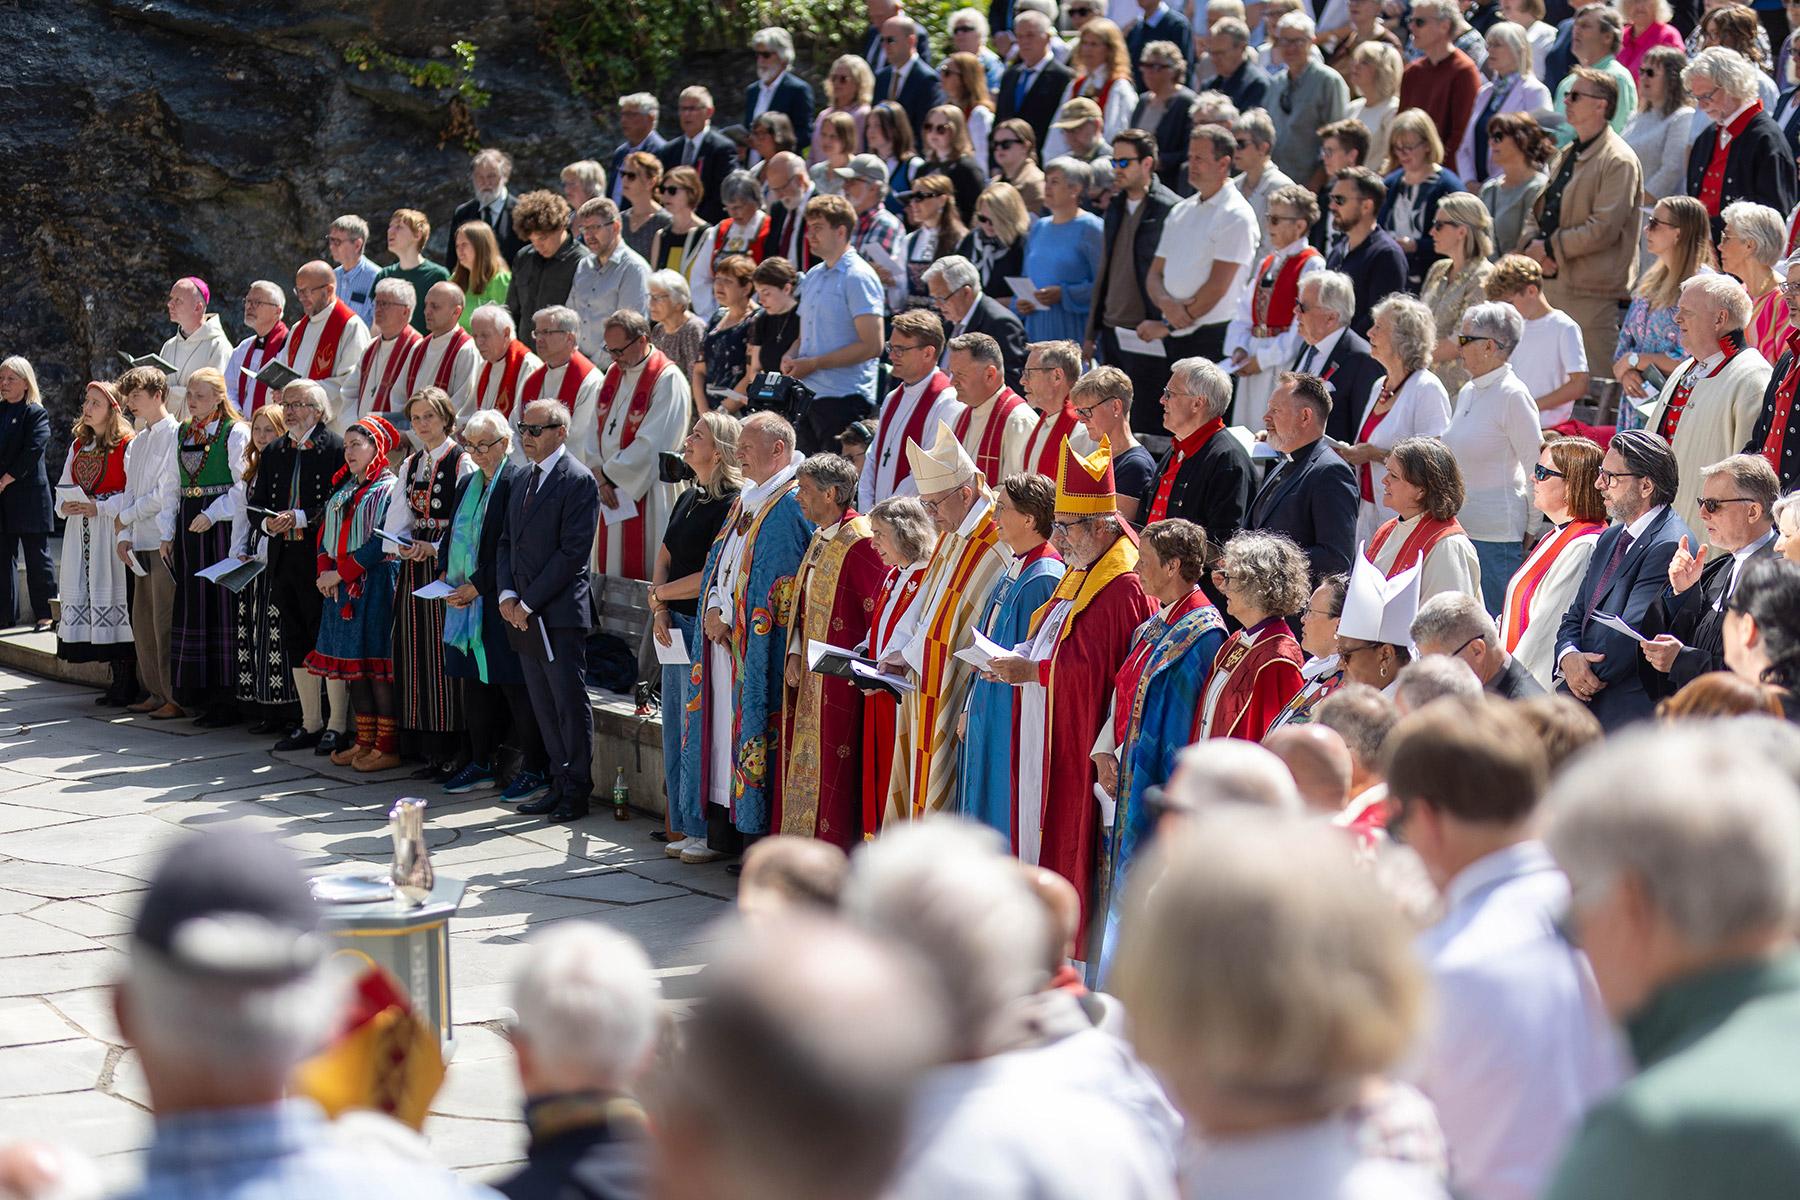 A festive church service with ecumenical guests was held on the anniversary of the adoption of Christian law in Norway 1000 years ago. LWF President Henrik Stubkjær, and the Regional Secretary for Europe, Ireneusz Lukas, were among the guests. Photo: Gjermund Øystese, Norges Kristne Råd